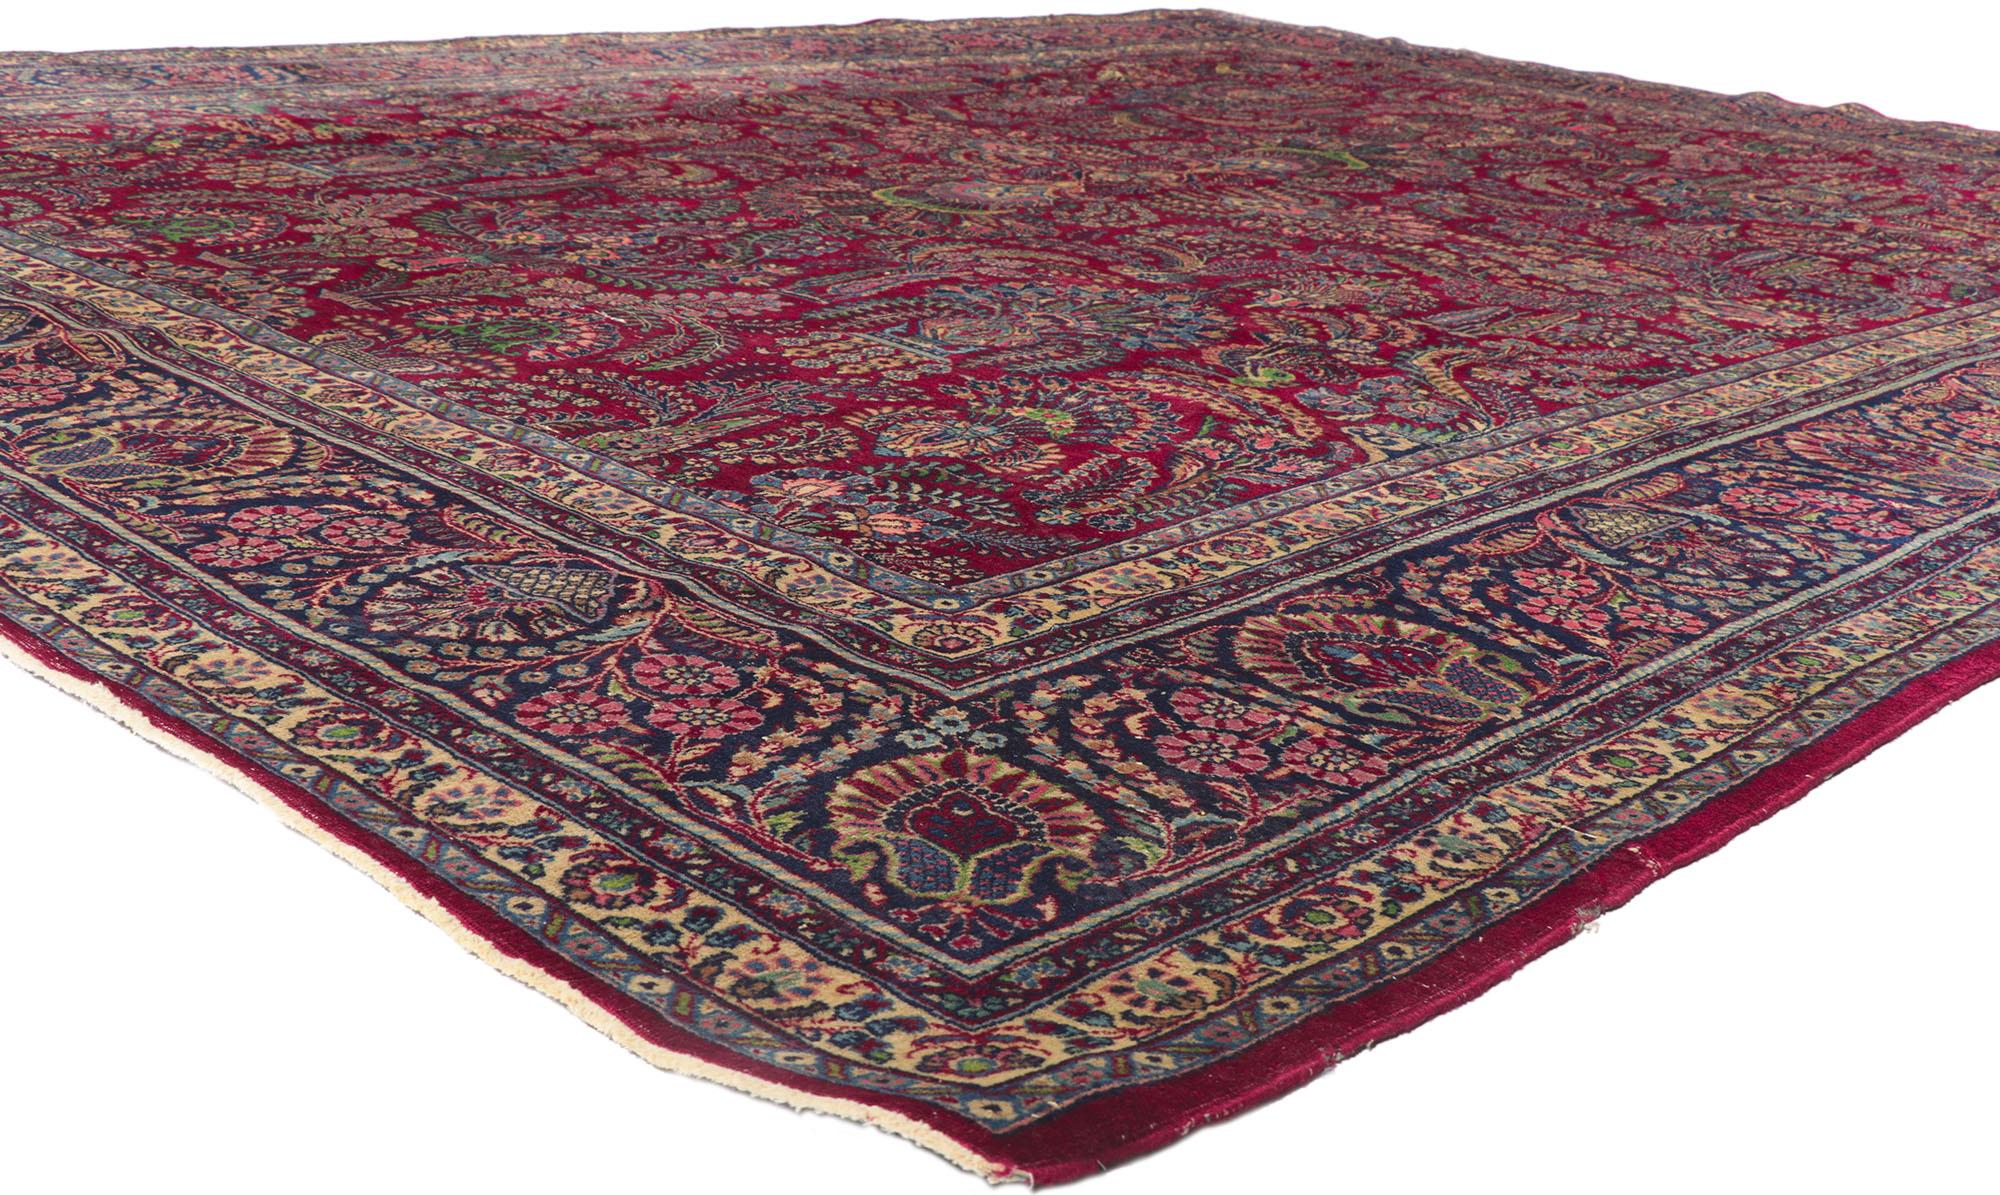 78162 Antique Persian Kerman Rug, 11'02 x 13'09.

Embarking on a journey through time, this hand-knotted wool antique Persian Kerman rug epitomizes the union of stately decadence and refined sophistication. Infused with historical significance,